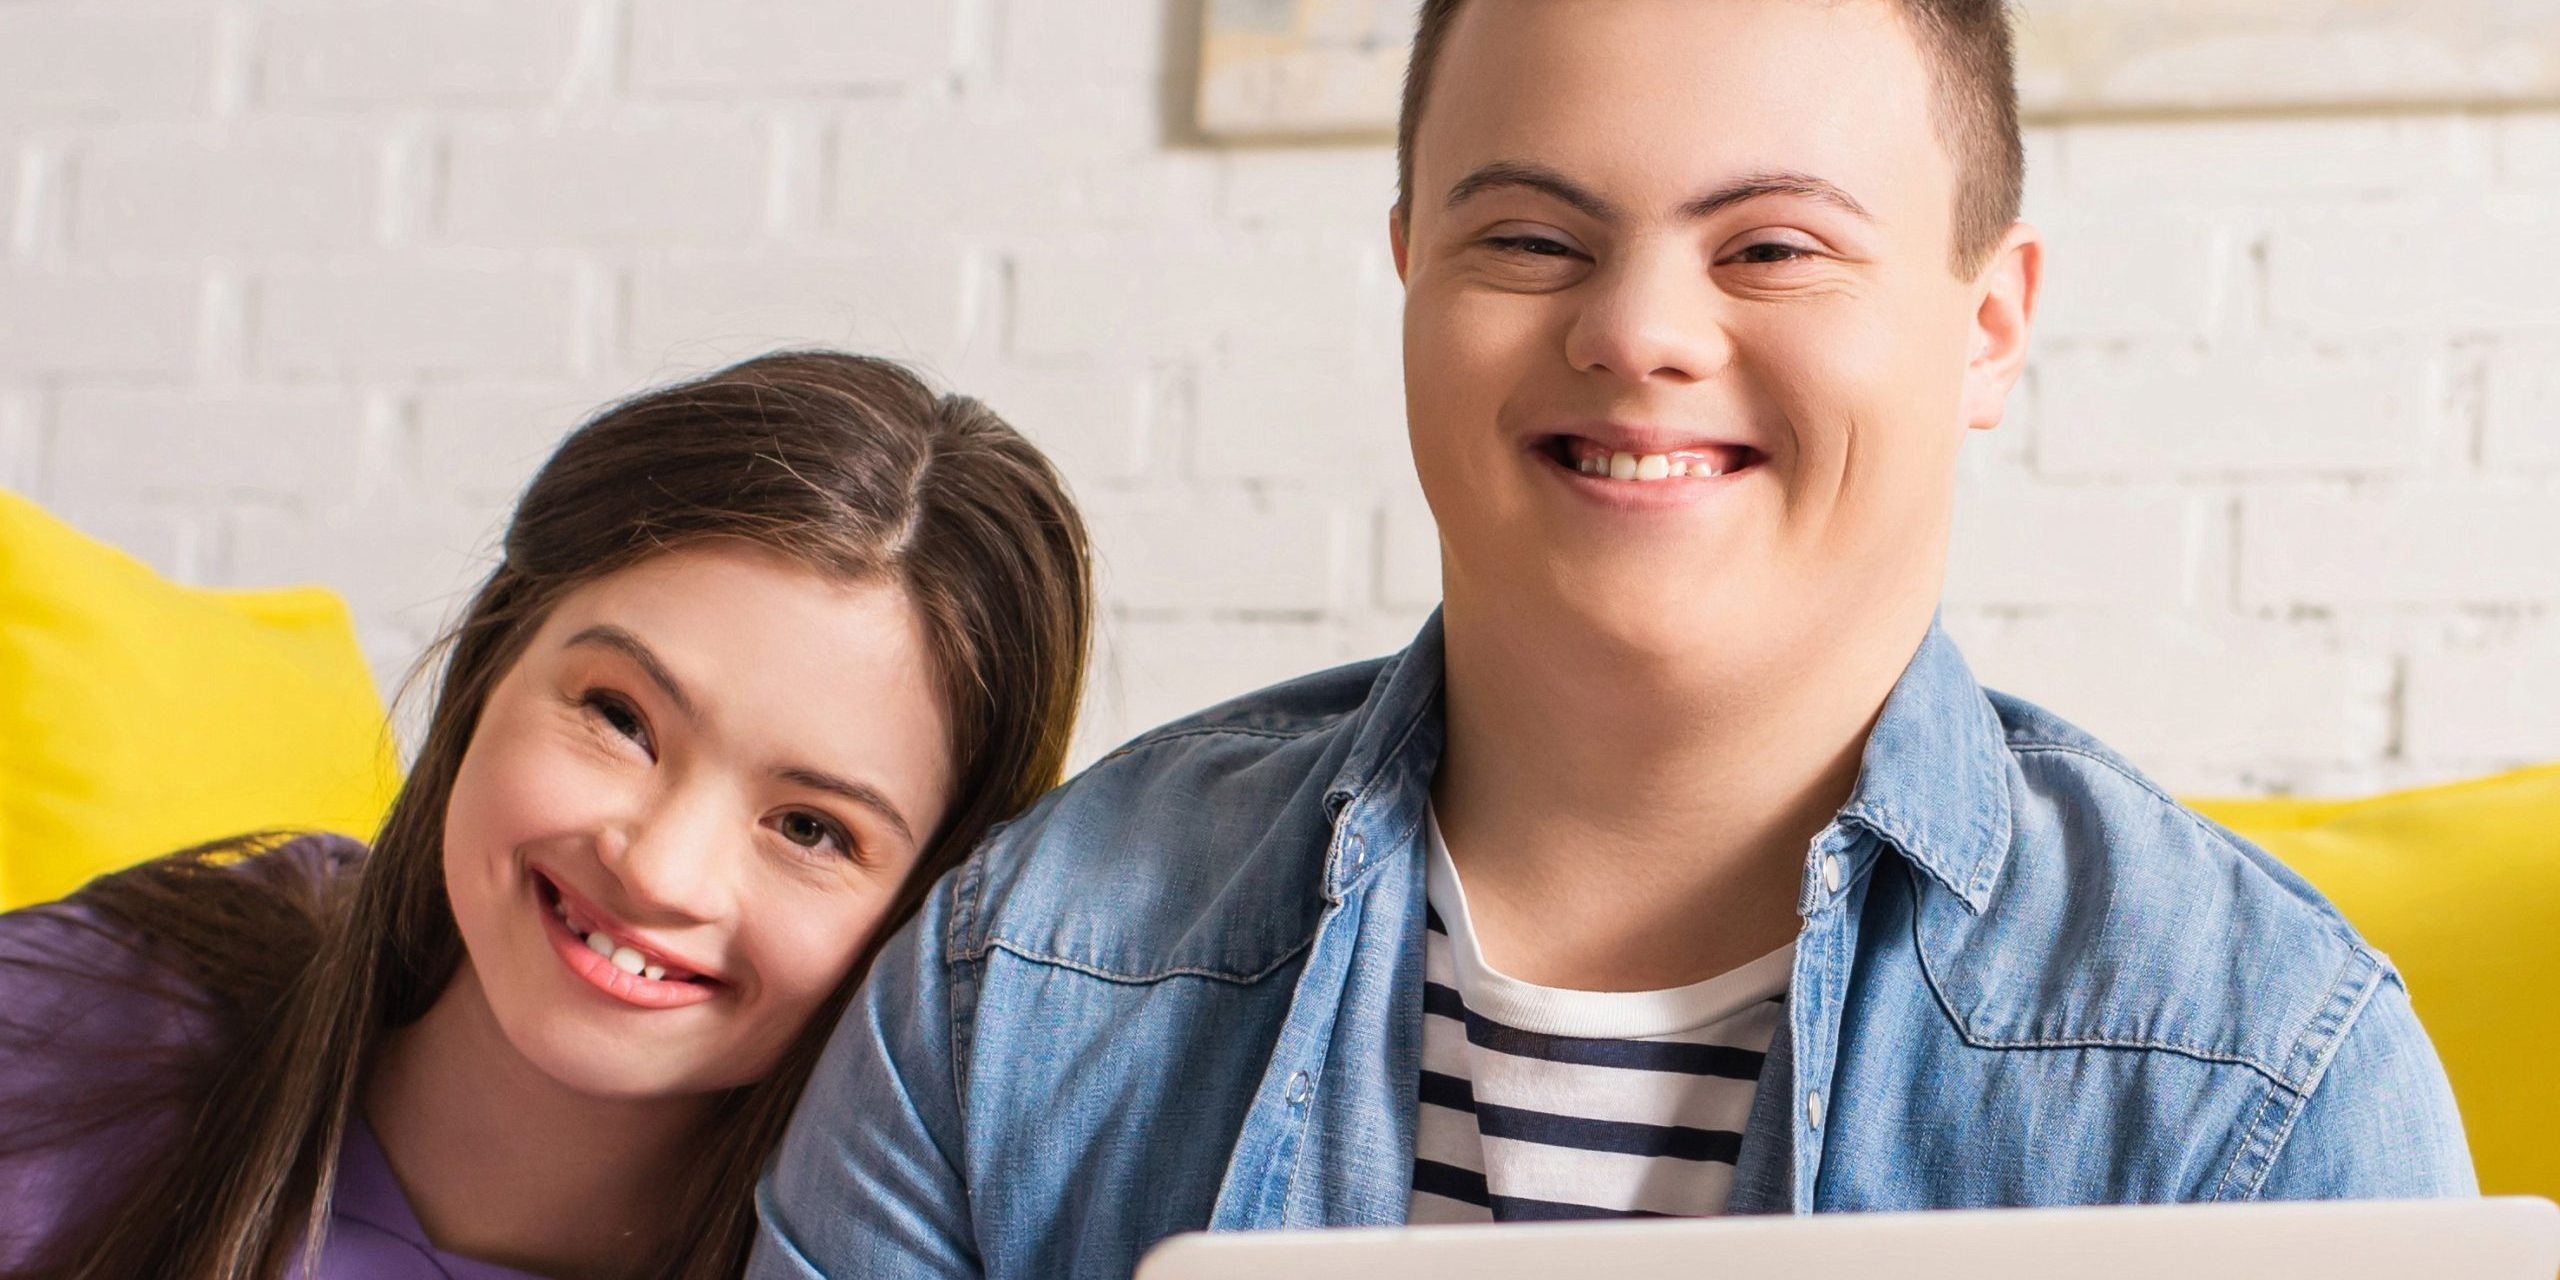 A young woman and a young man with Down syndrome smiling at the camera, sitting together with a laptop in a bright room with a white brick wall in the background.